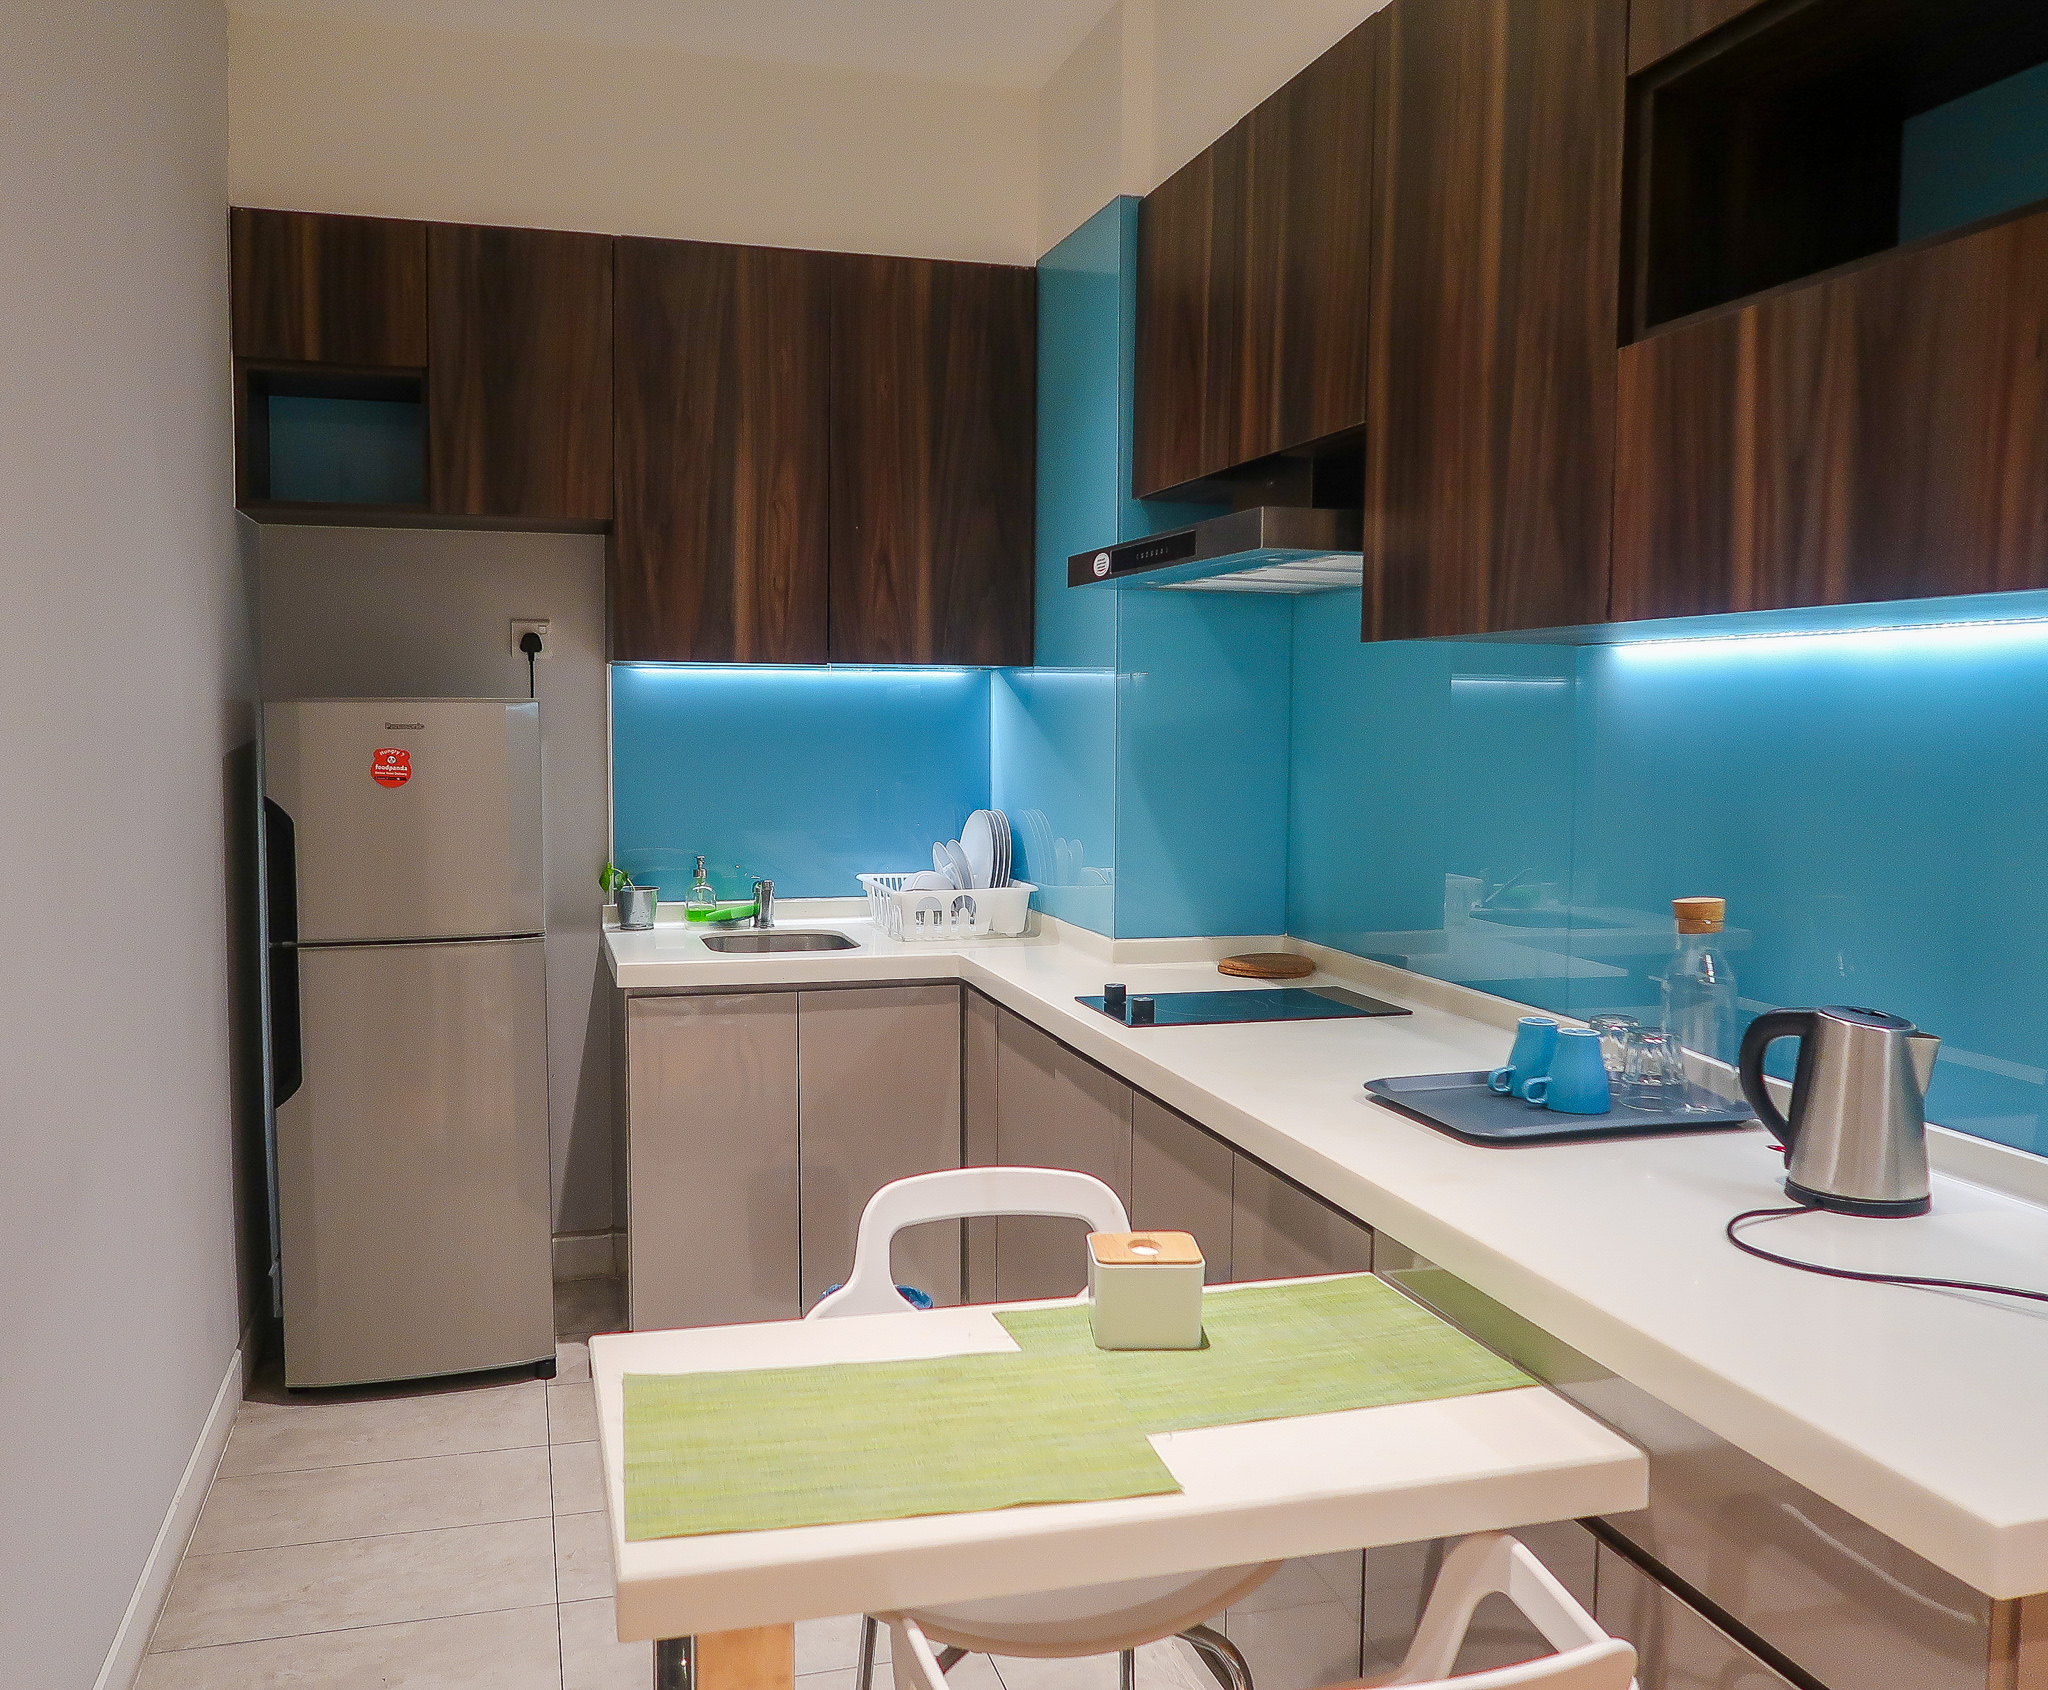 Where to stay in Kuala Lumpur - Kitchen area